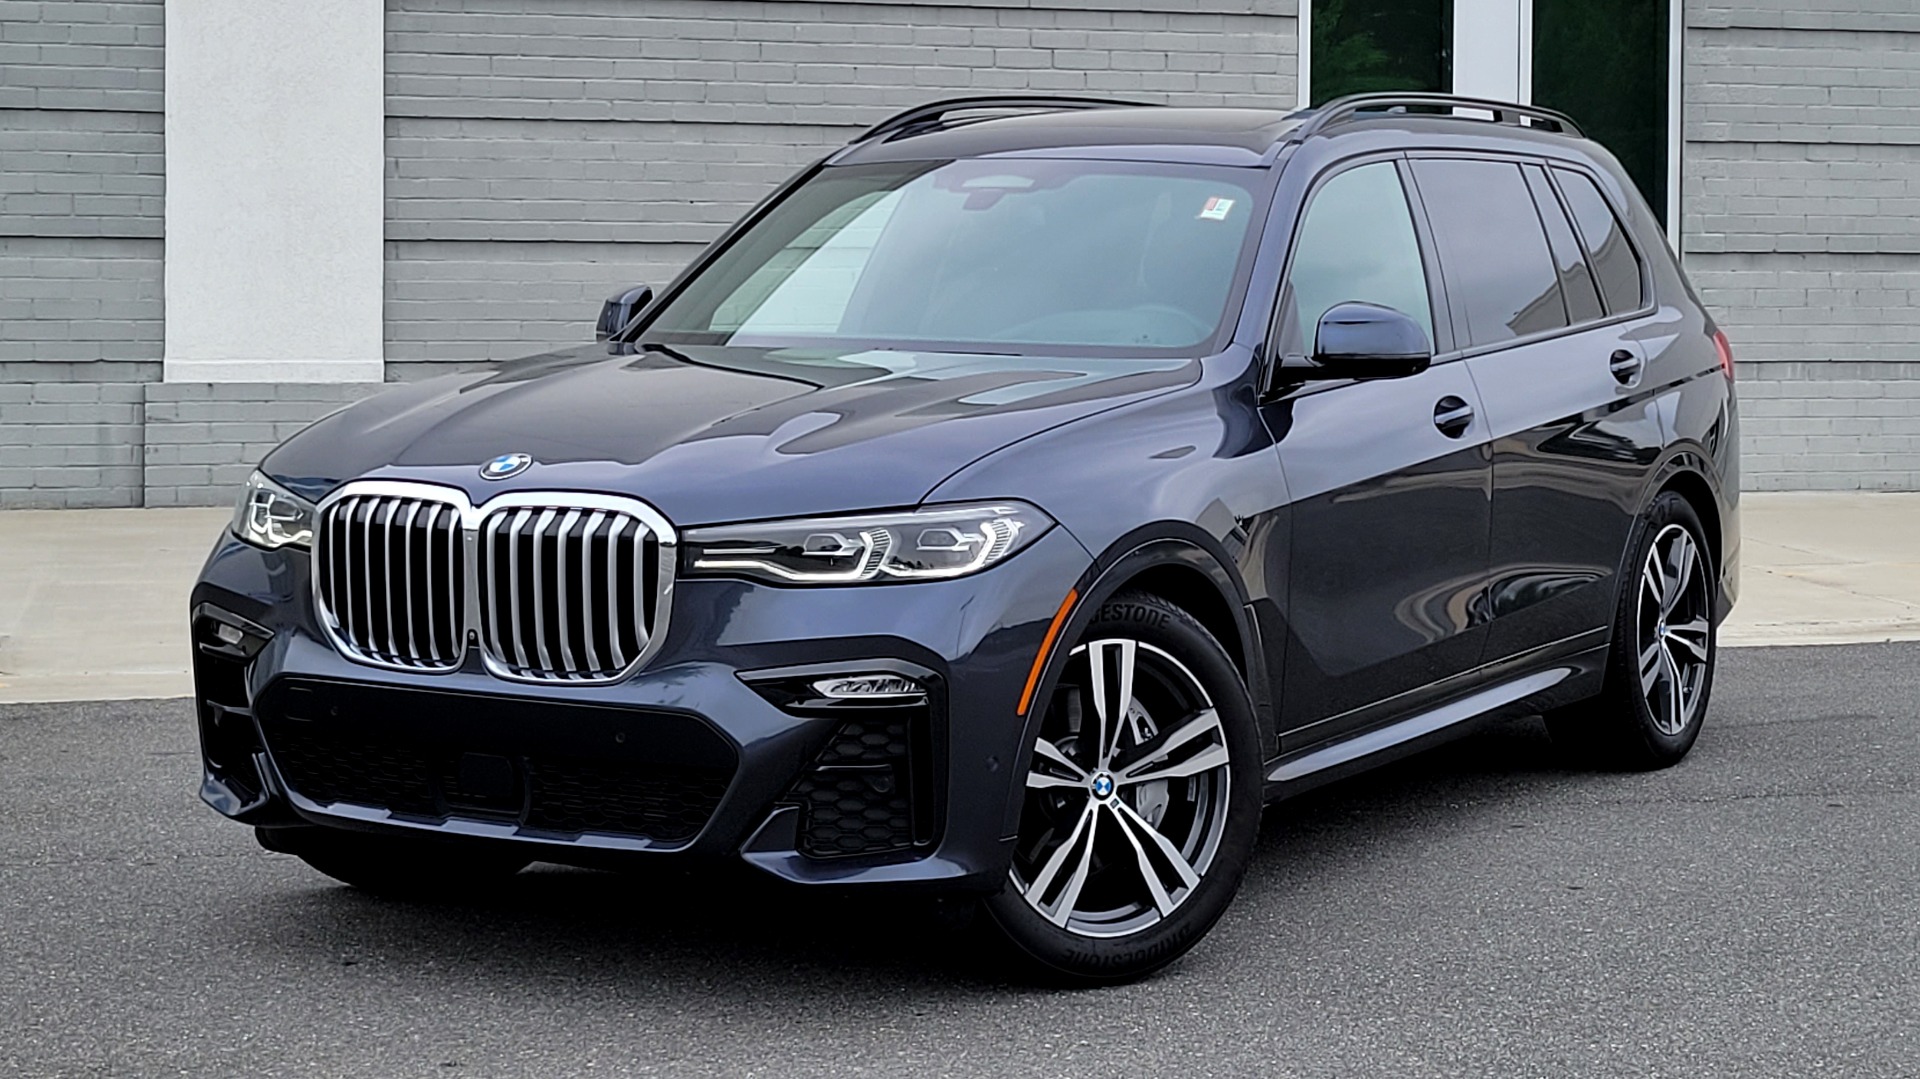 Used 2019 BMW X7 XDRIVE40I M-SPORT / PREMIUM / CLD THR / PARK ASST / DRVR ASST / SKY LOUNGE  for sale $64,395 at Formula Imports in Charlotte NC 28227 1